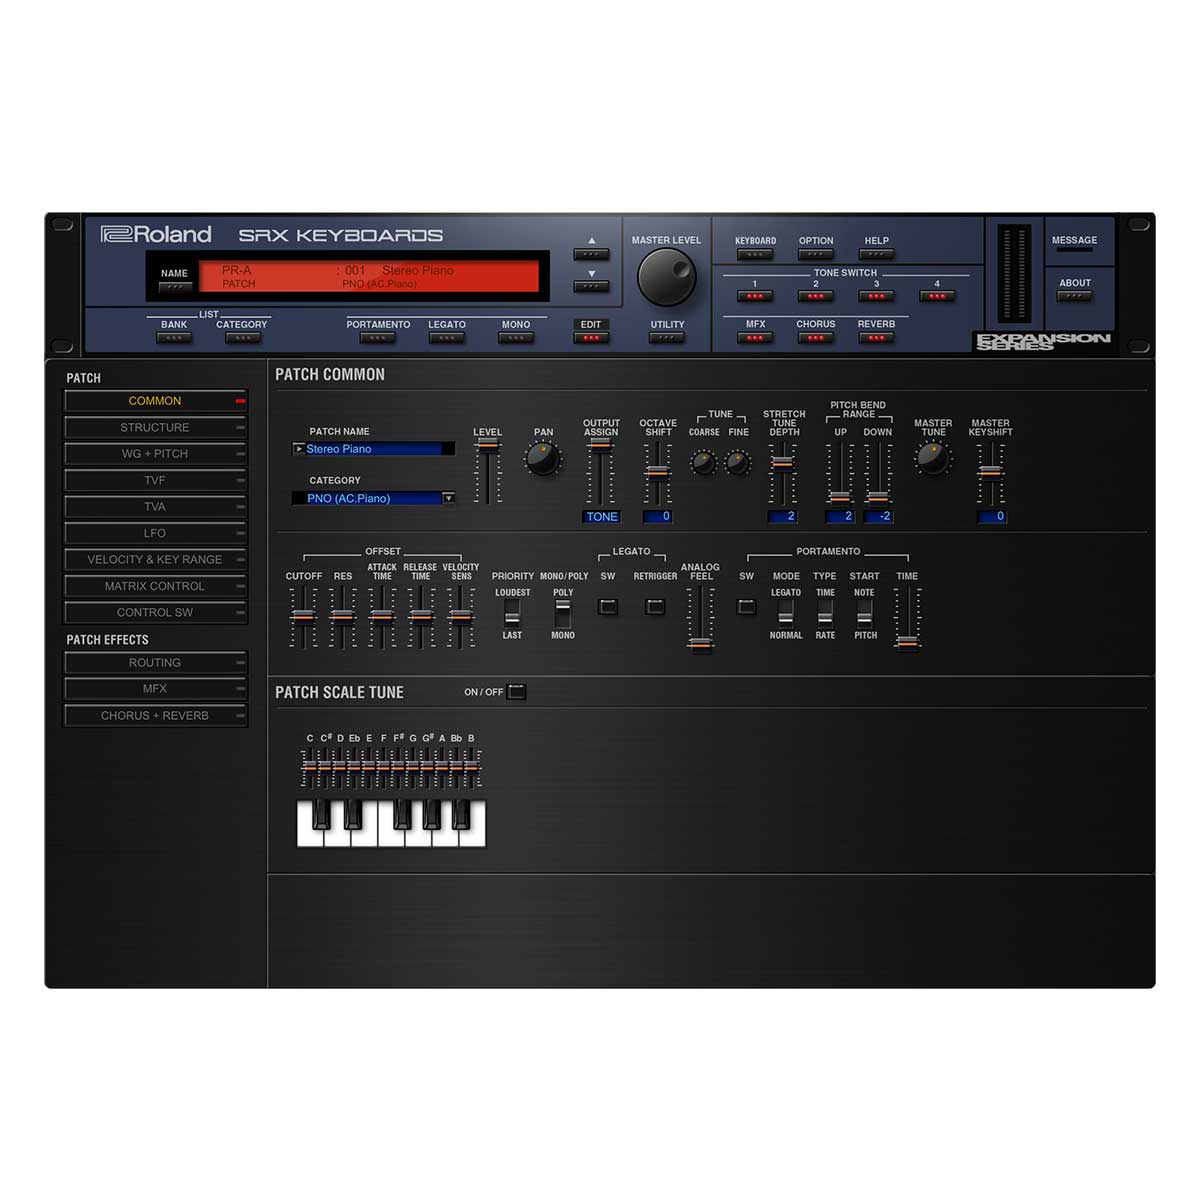 Srx orchestra. Roland cloud. Roland Virtual Sound Canvas. Example of ROR and RRX.